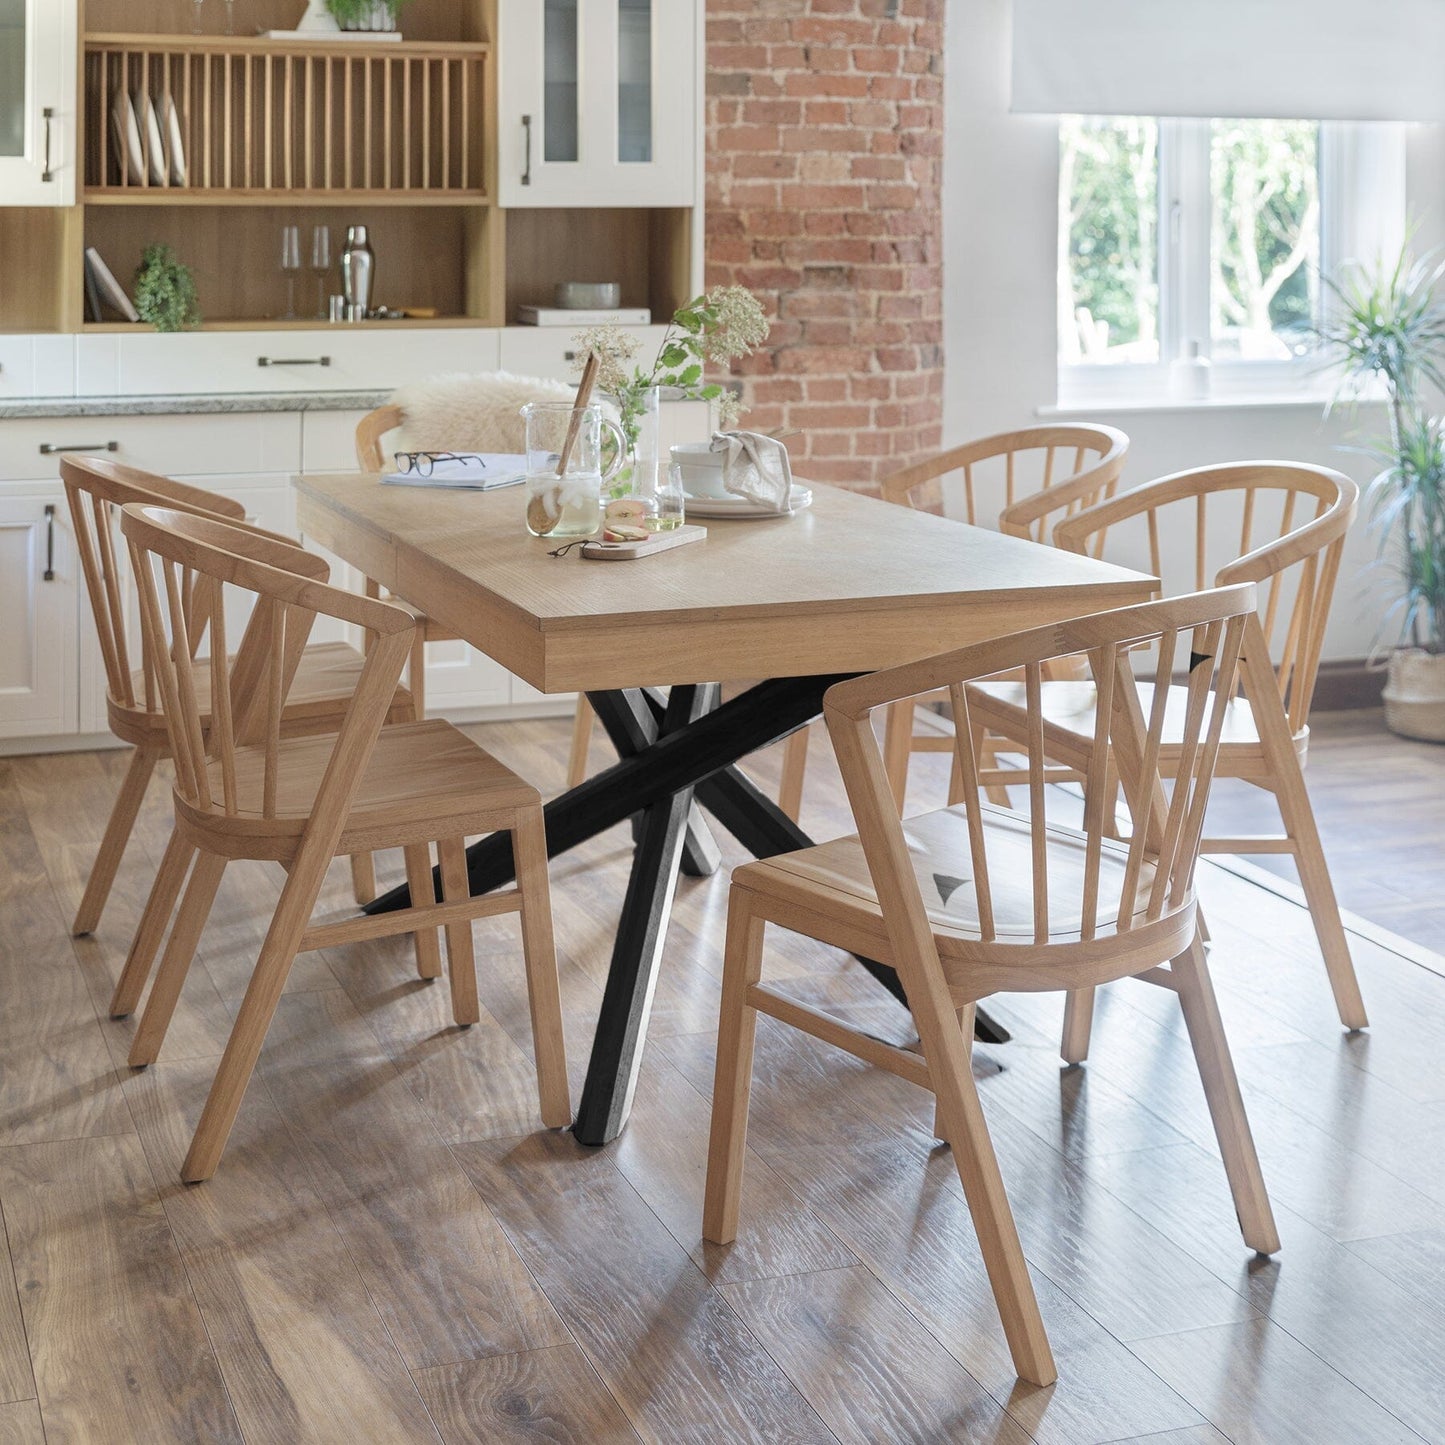 Amelia Whitewash Dining Table Set - 6 Seater - Pale Oak Spindle Back Chairs